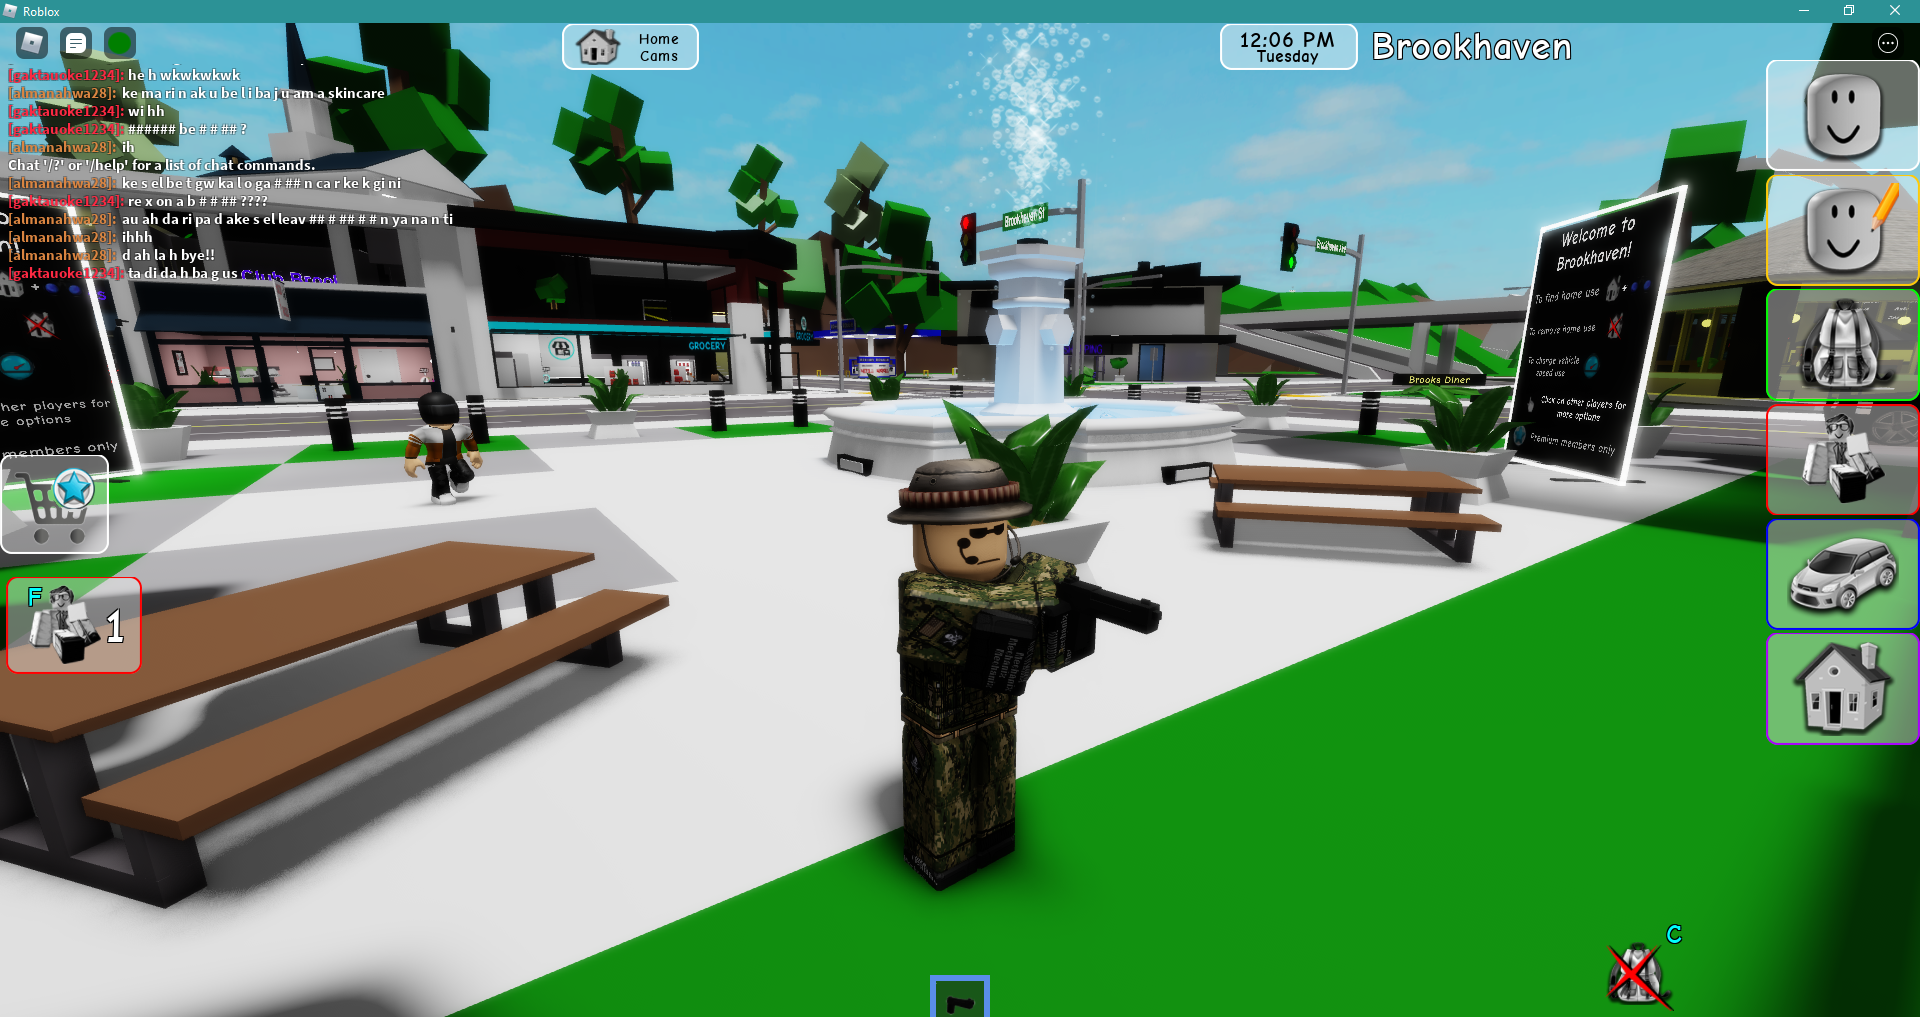 brookhaven roblox police station